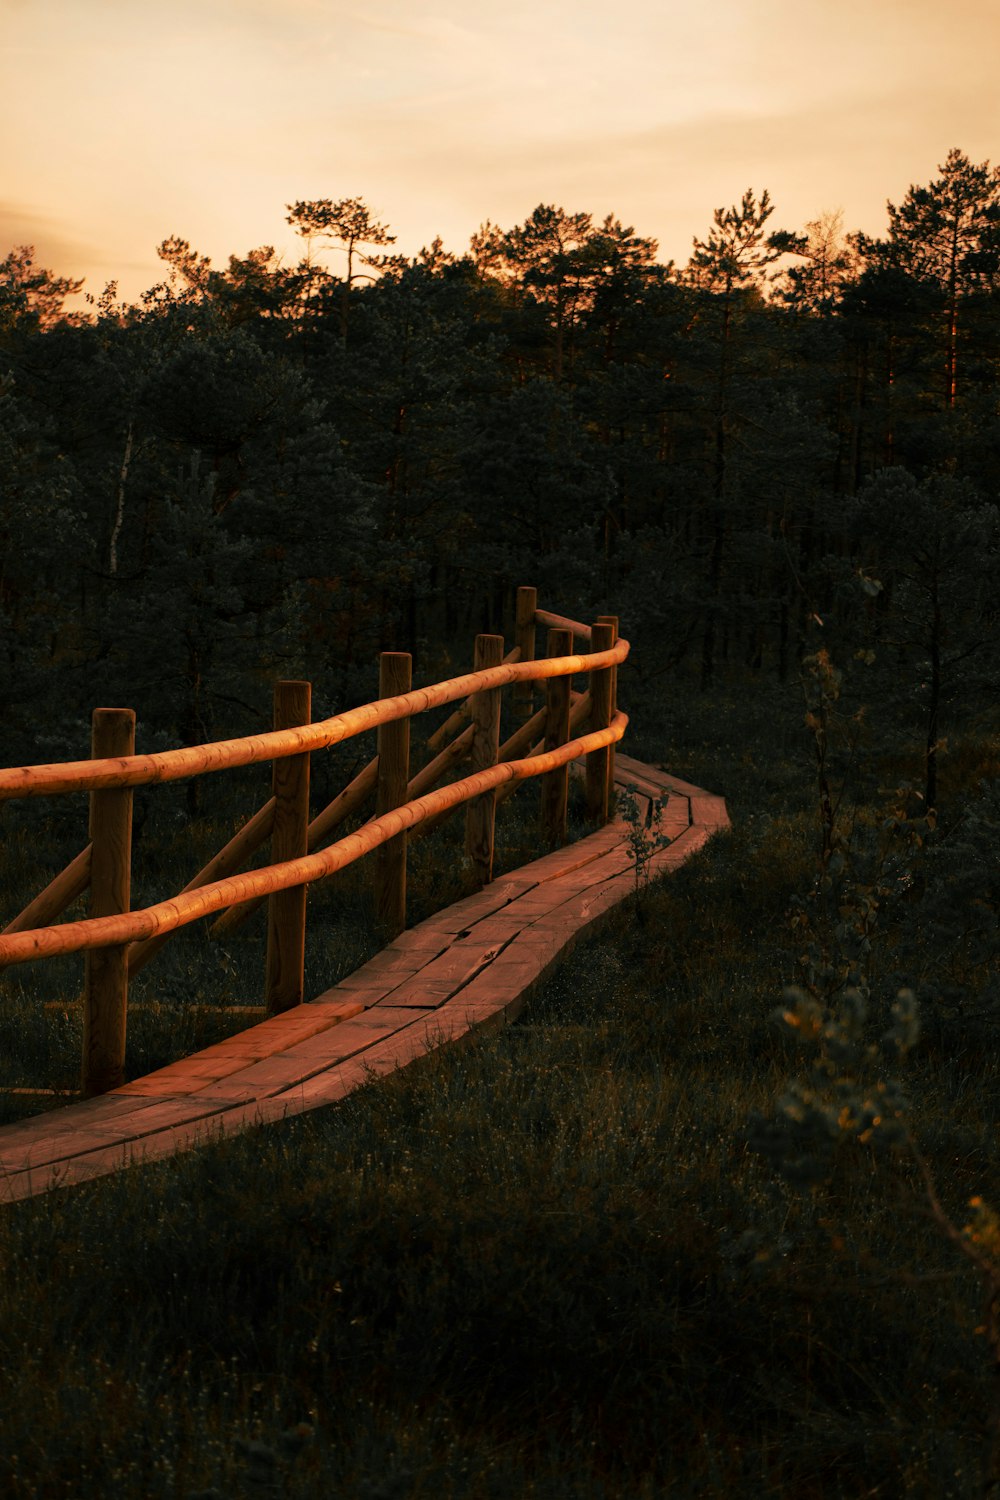 a wooden bridge in a grassy area with trees in the background